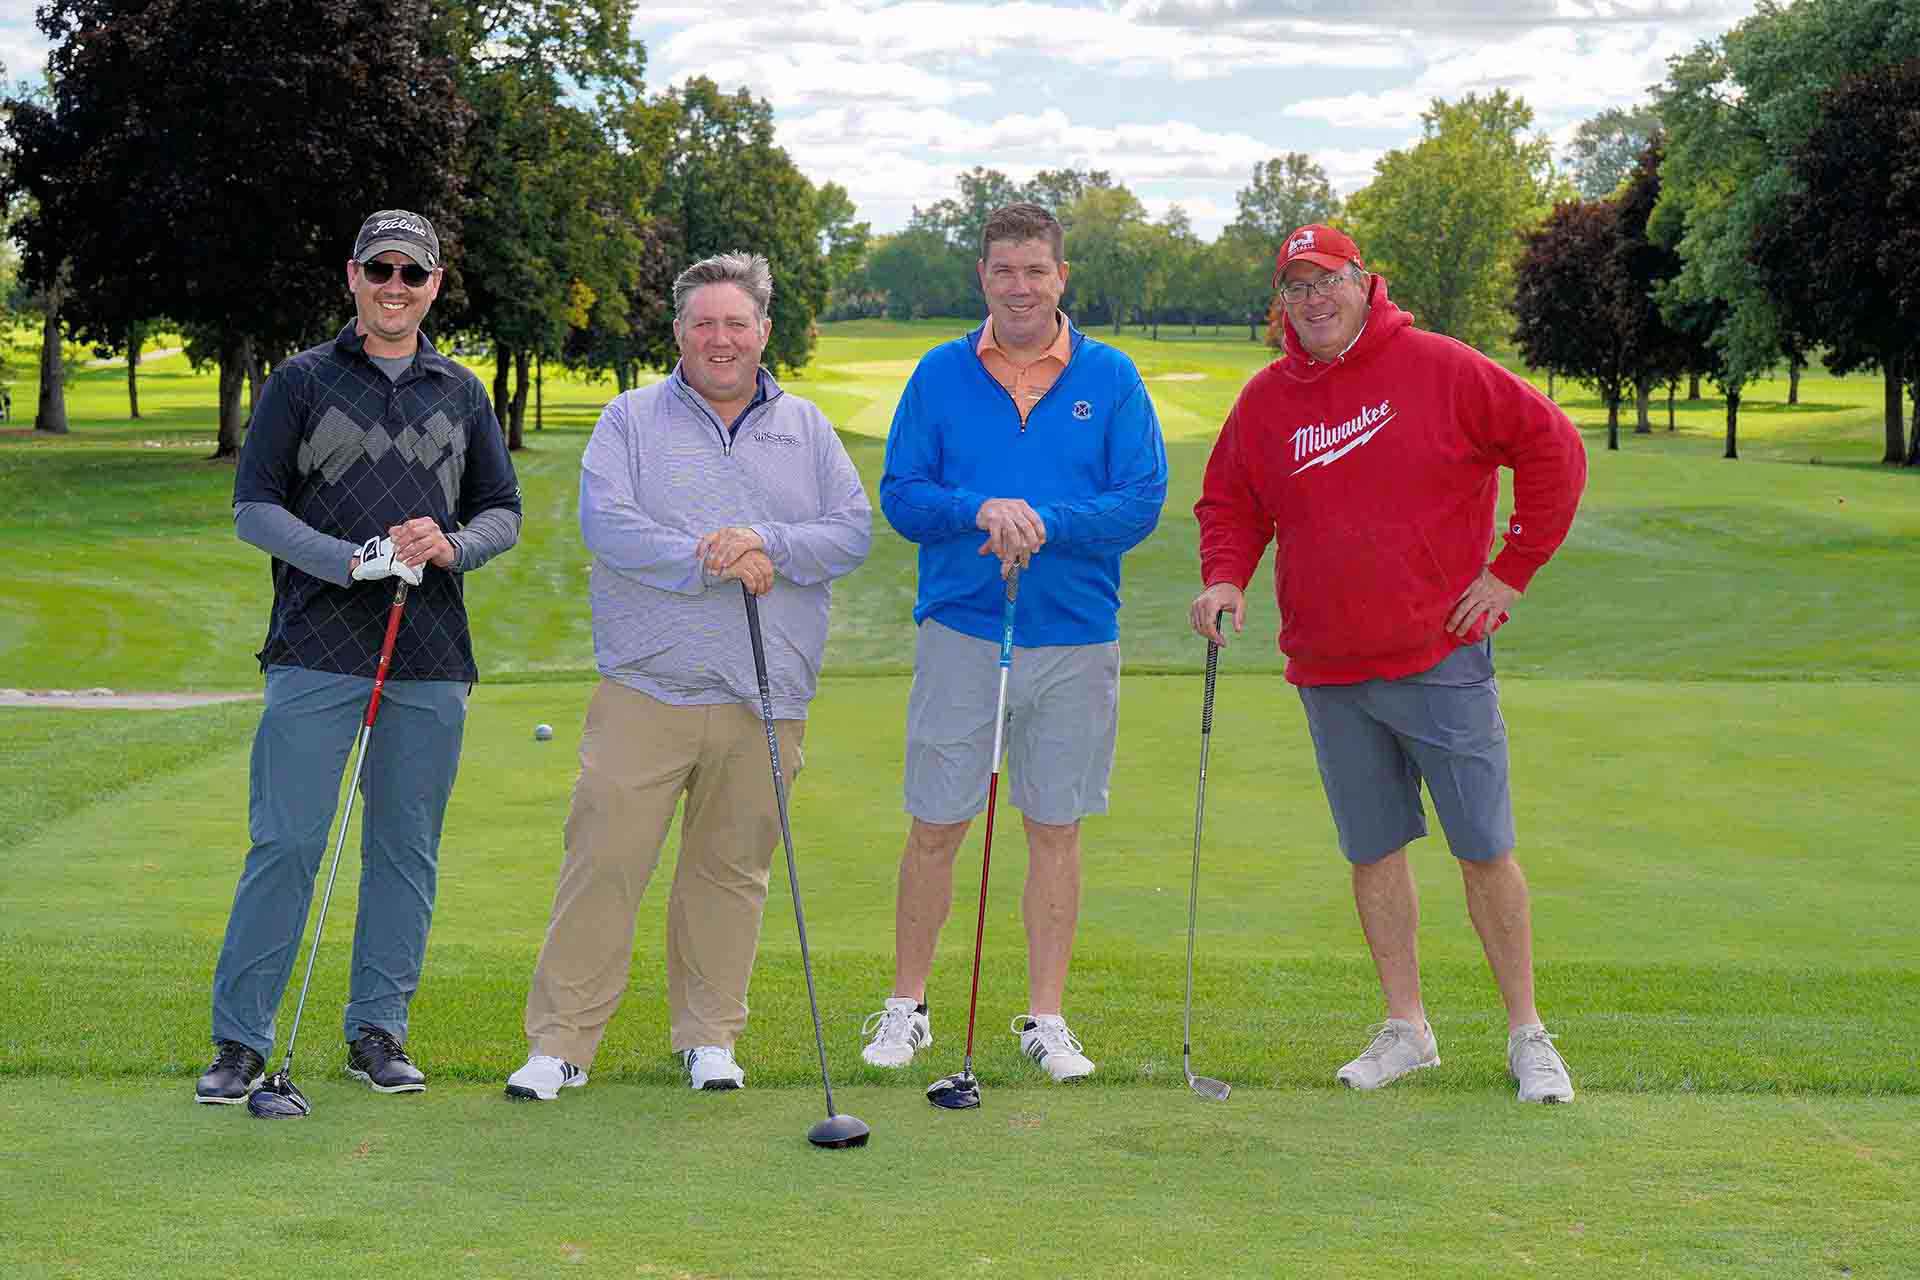 2020-endownment-classic-four-people-pose-for-photo-holding-golf-clubs